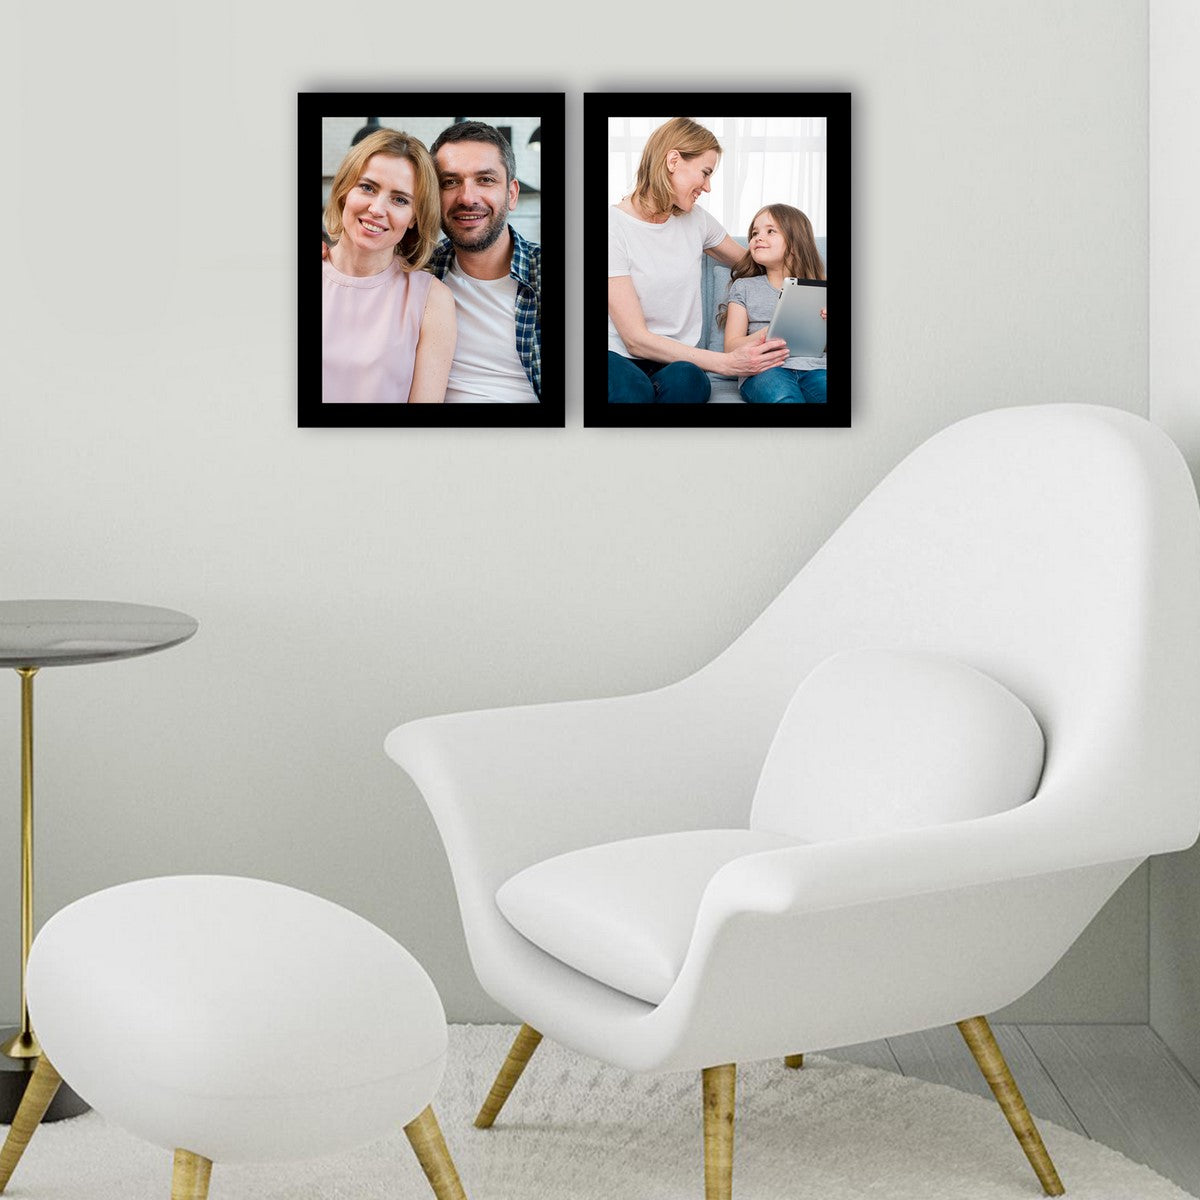 Memory Wall Collage Photo Frame - Set of 2 Photo Frames for 2 Photos of 8"x10" 2